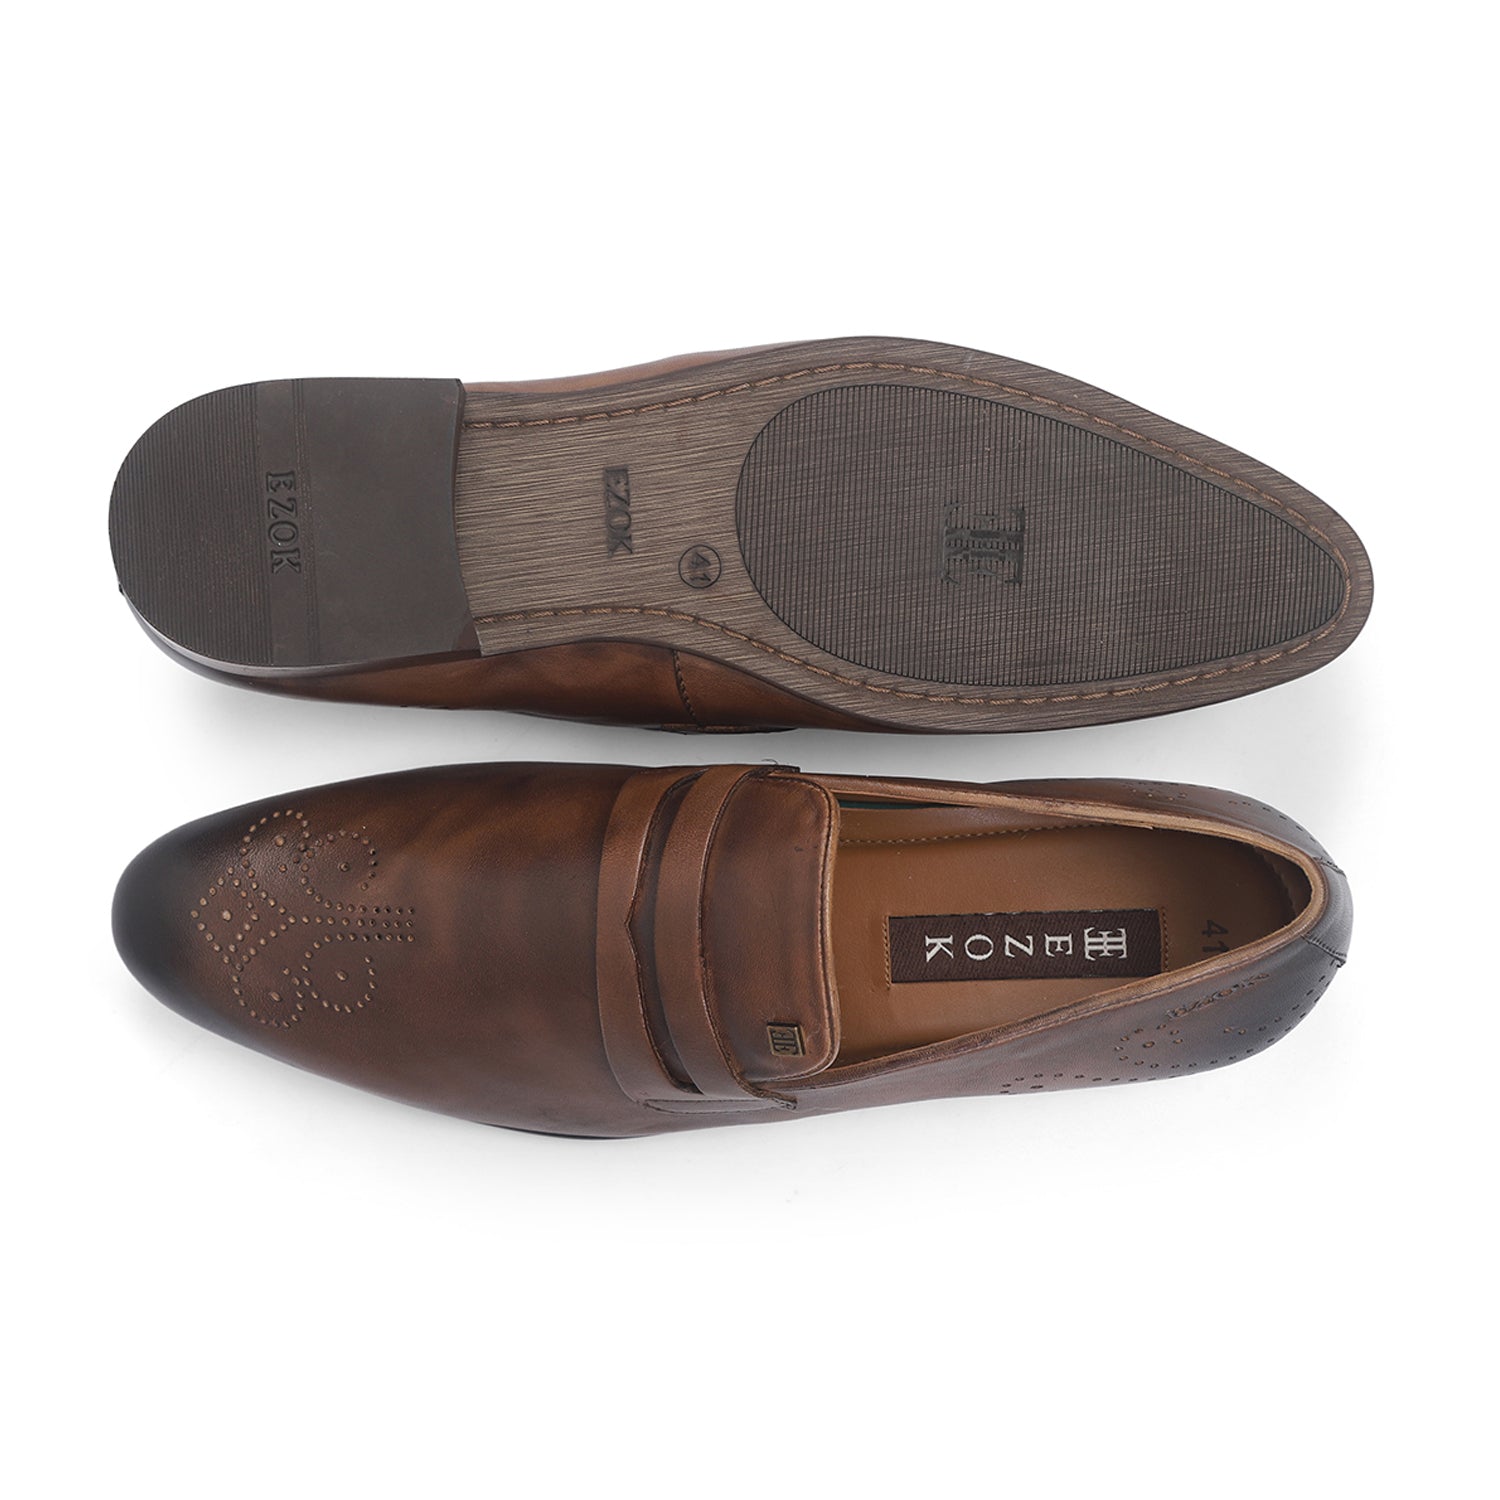 Ezok Men Brown Slip-On Formal Penny Loafers With Perforated Toe Shoes